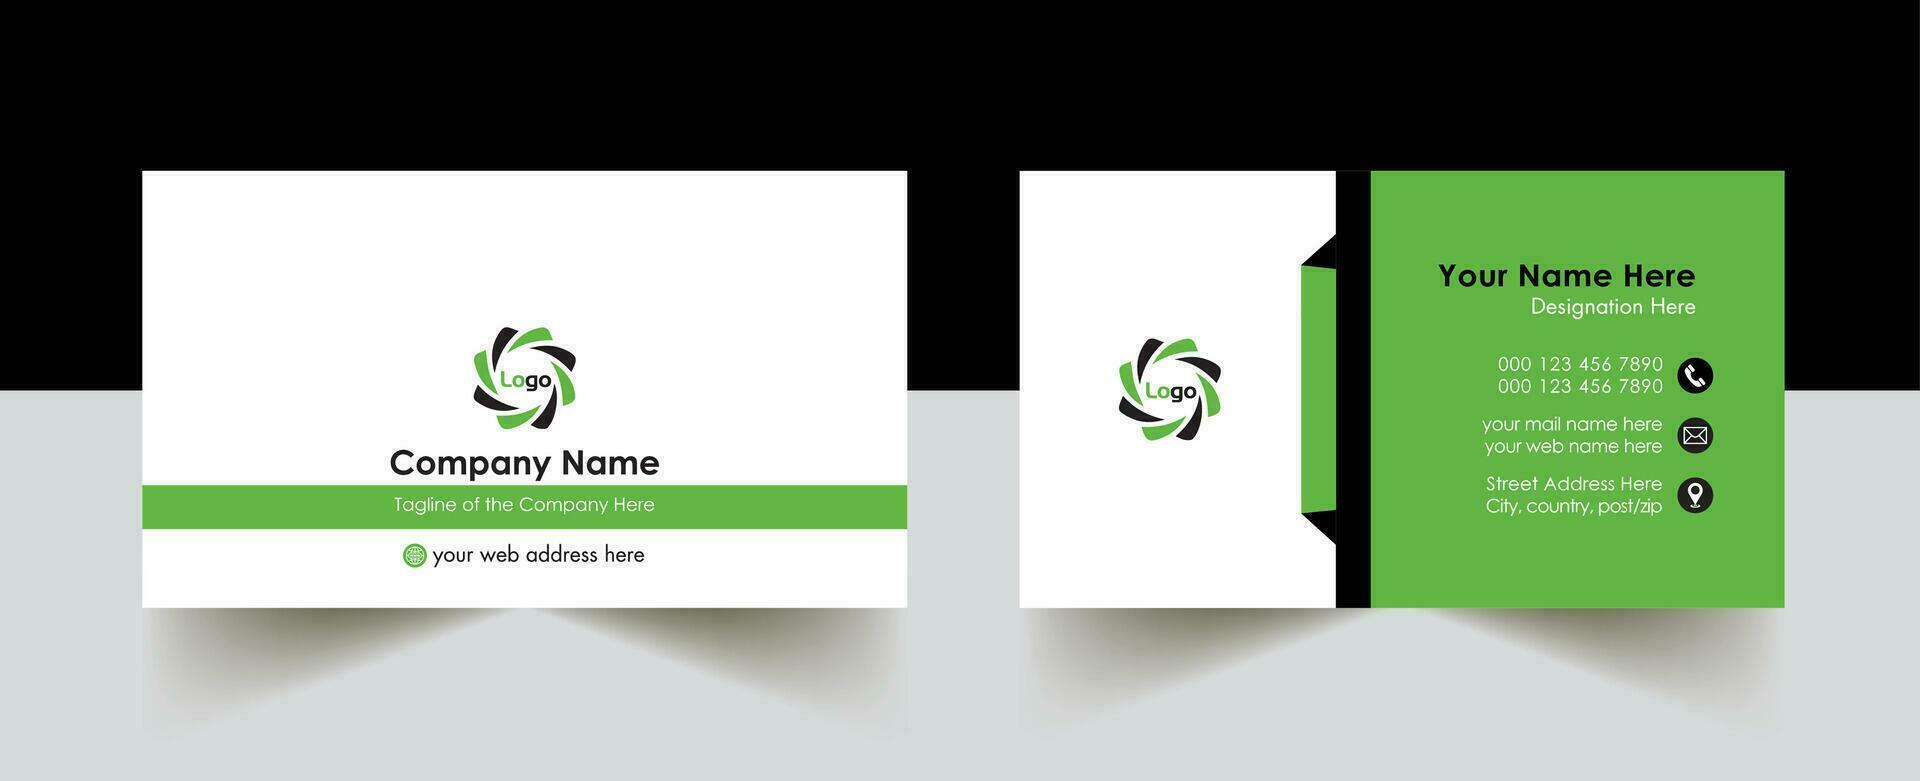 Modern Creative Clean professional Business Card Design Template, Visiting Card free vector